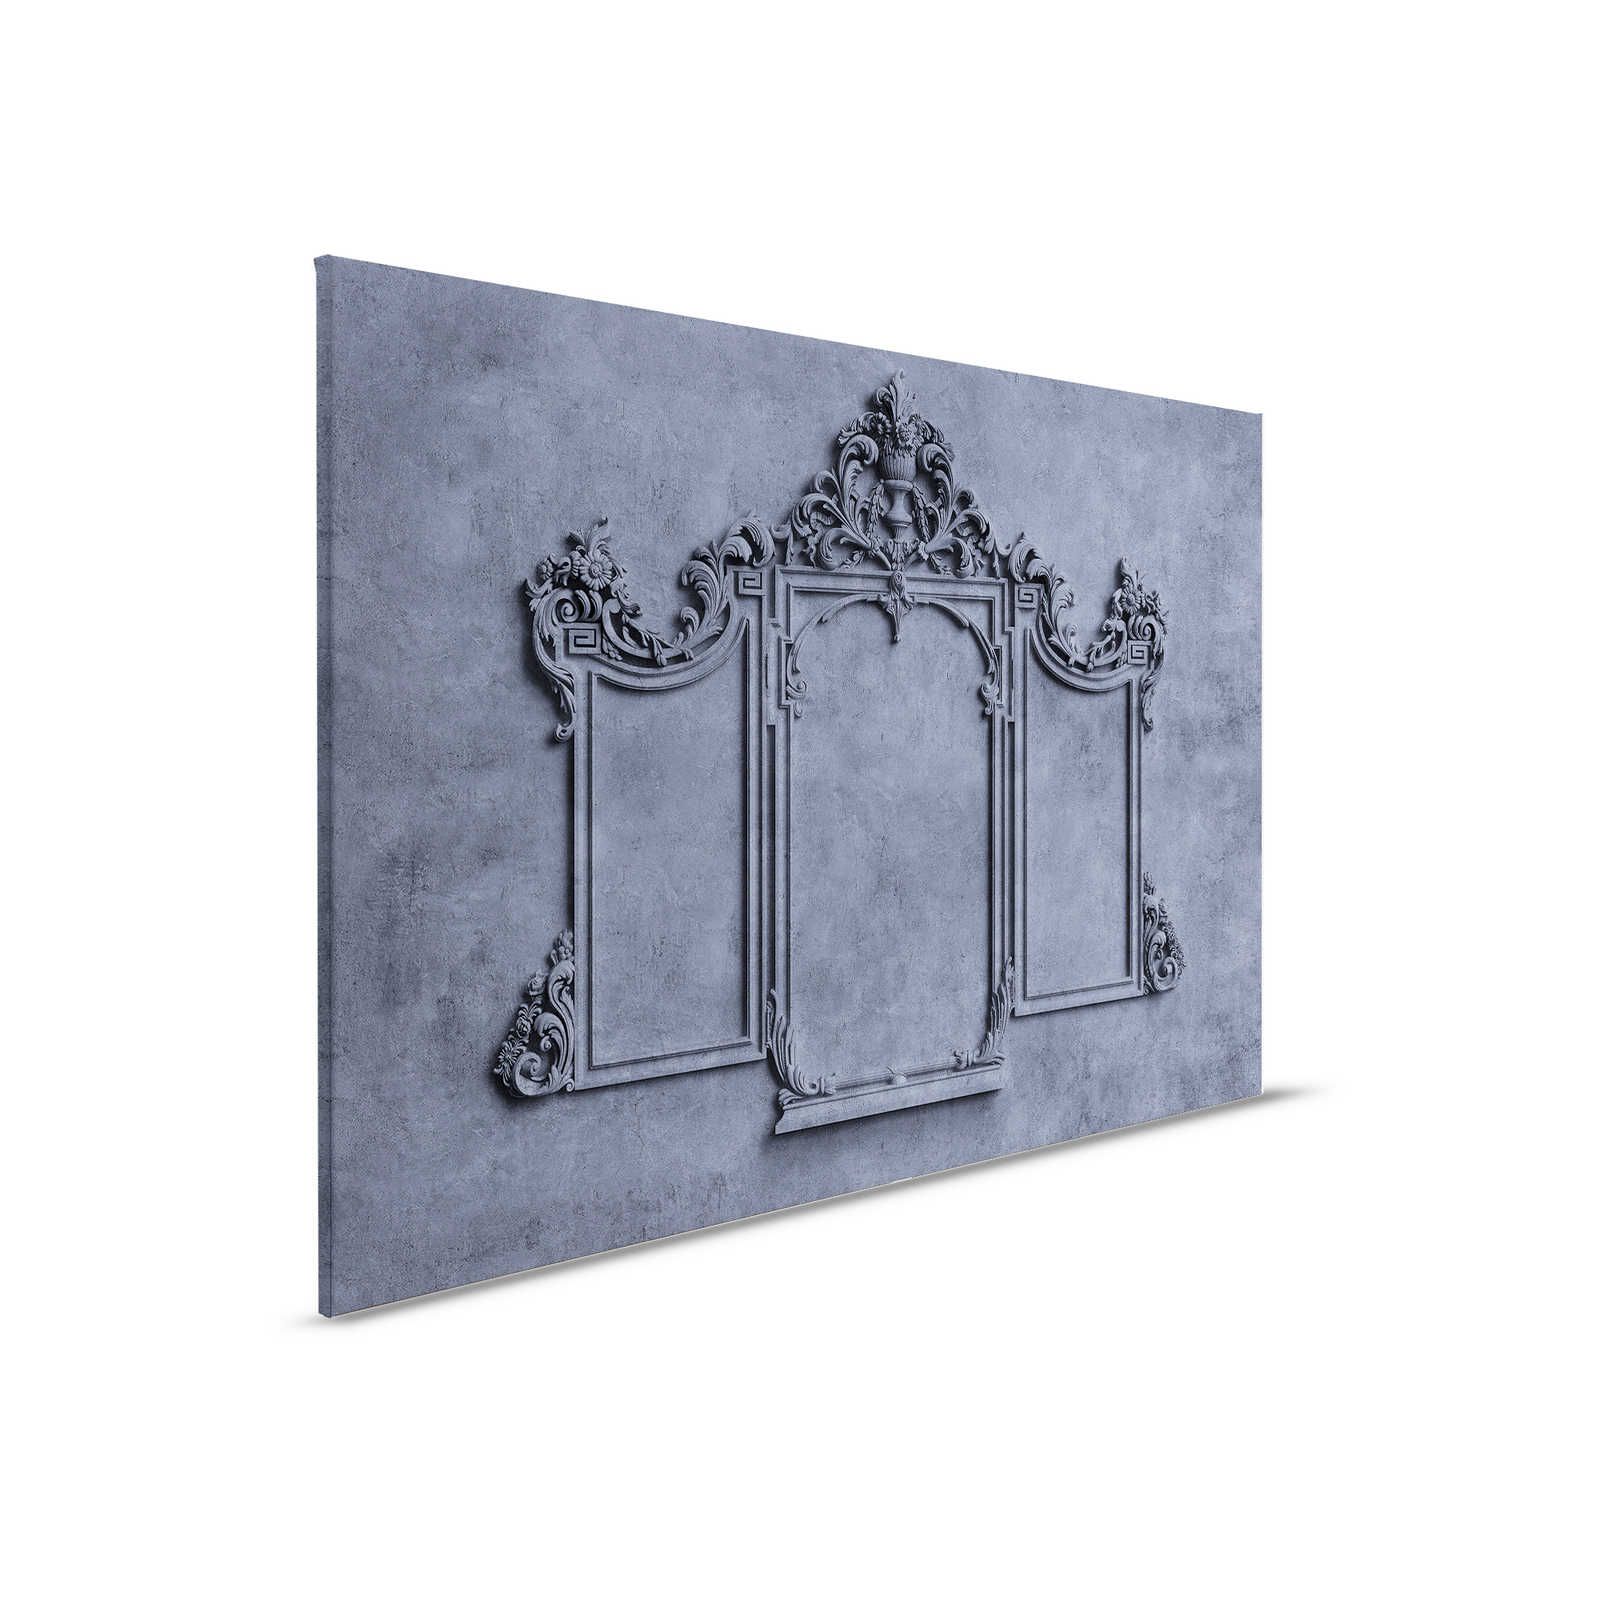 Lyon 3 - Canvas painting 3D stucco picture frame & plaster look in blue - 0.90 m x 0.60 m
